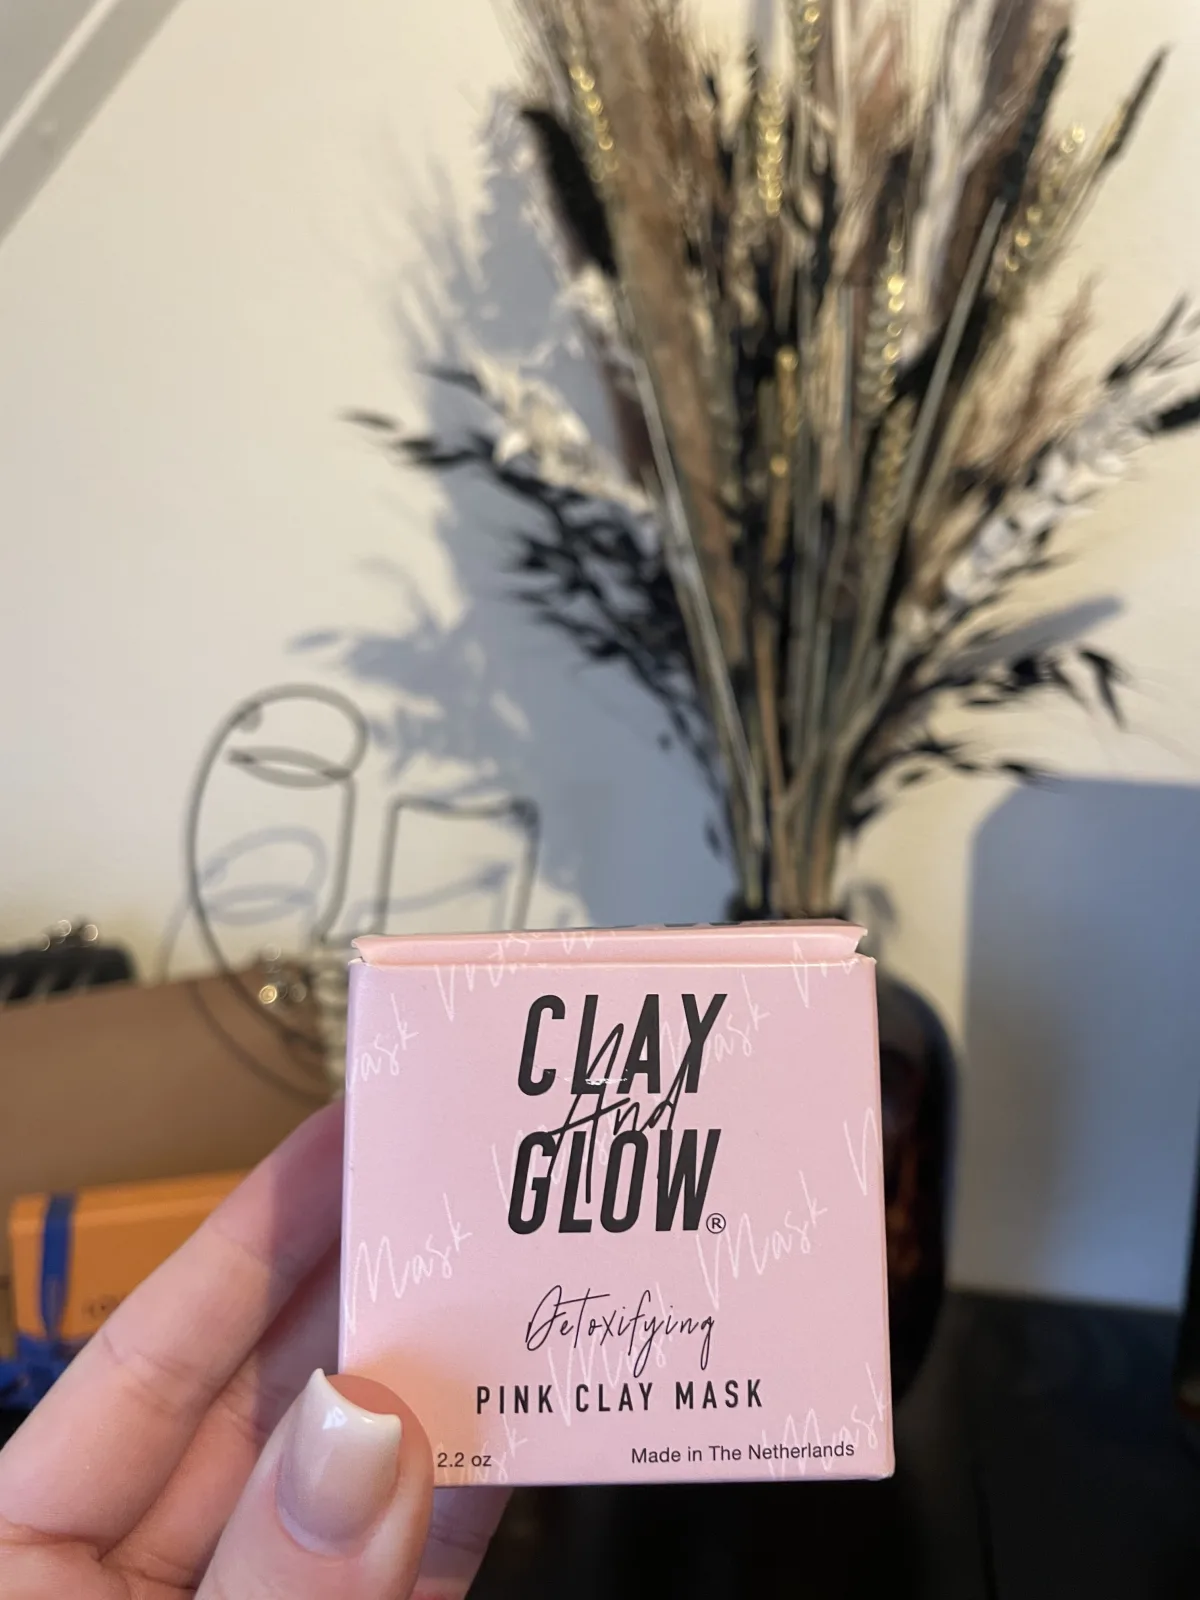 Pink Clay Mask 130GR - review image